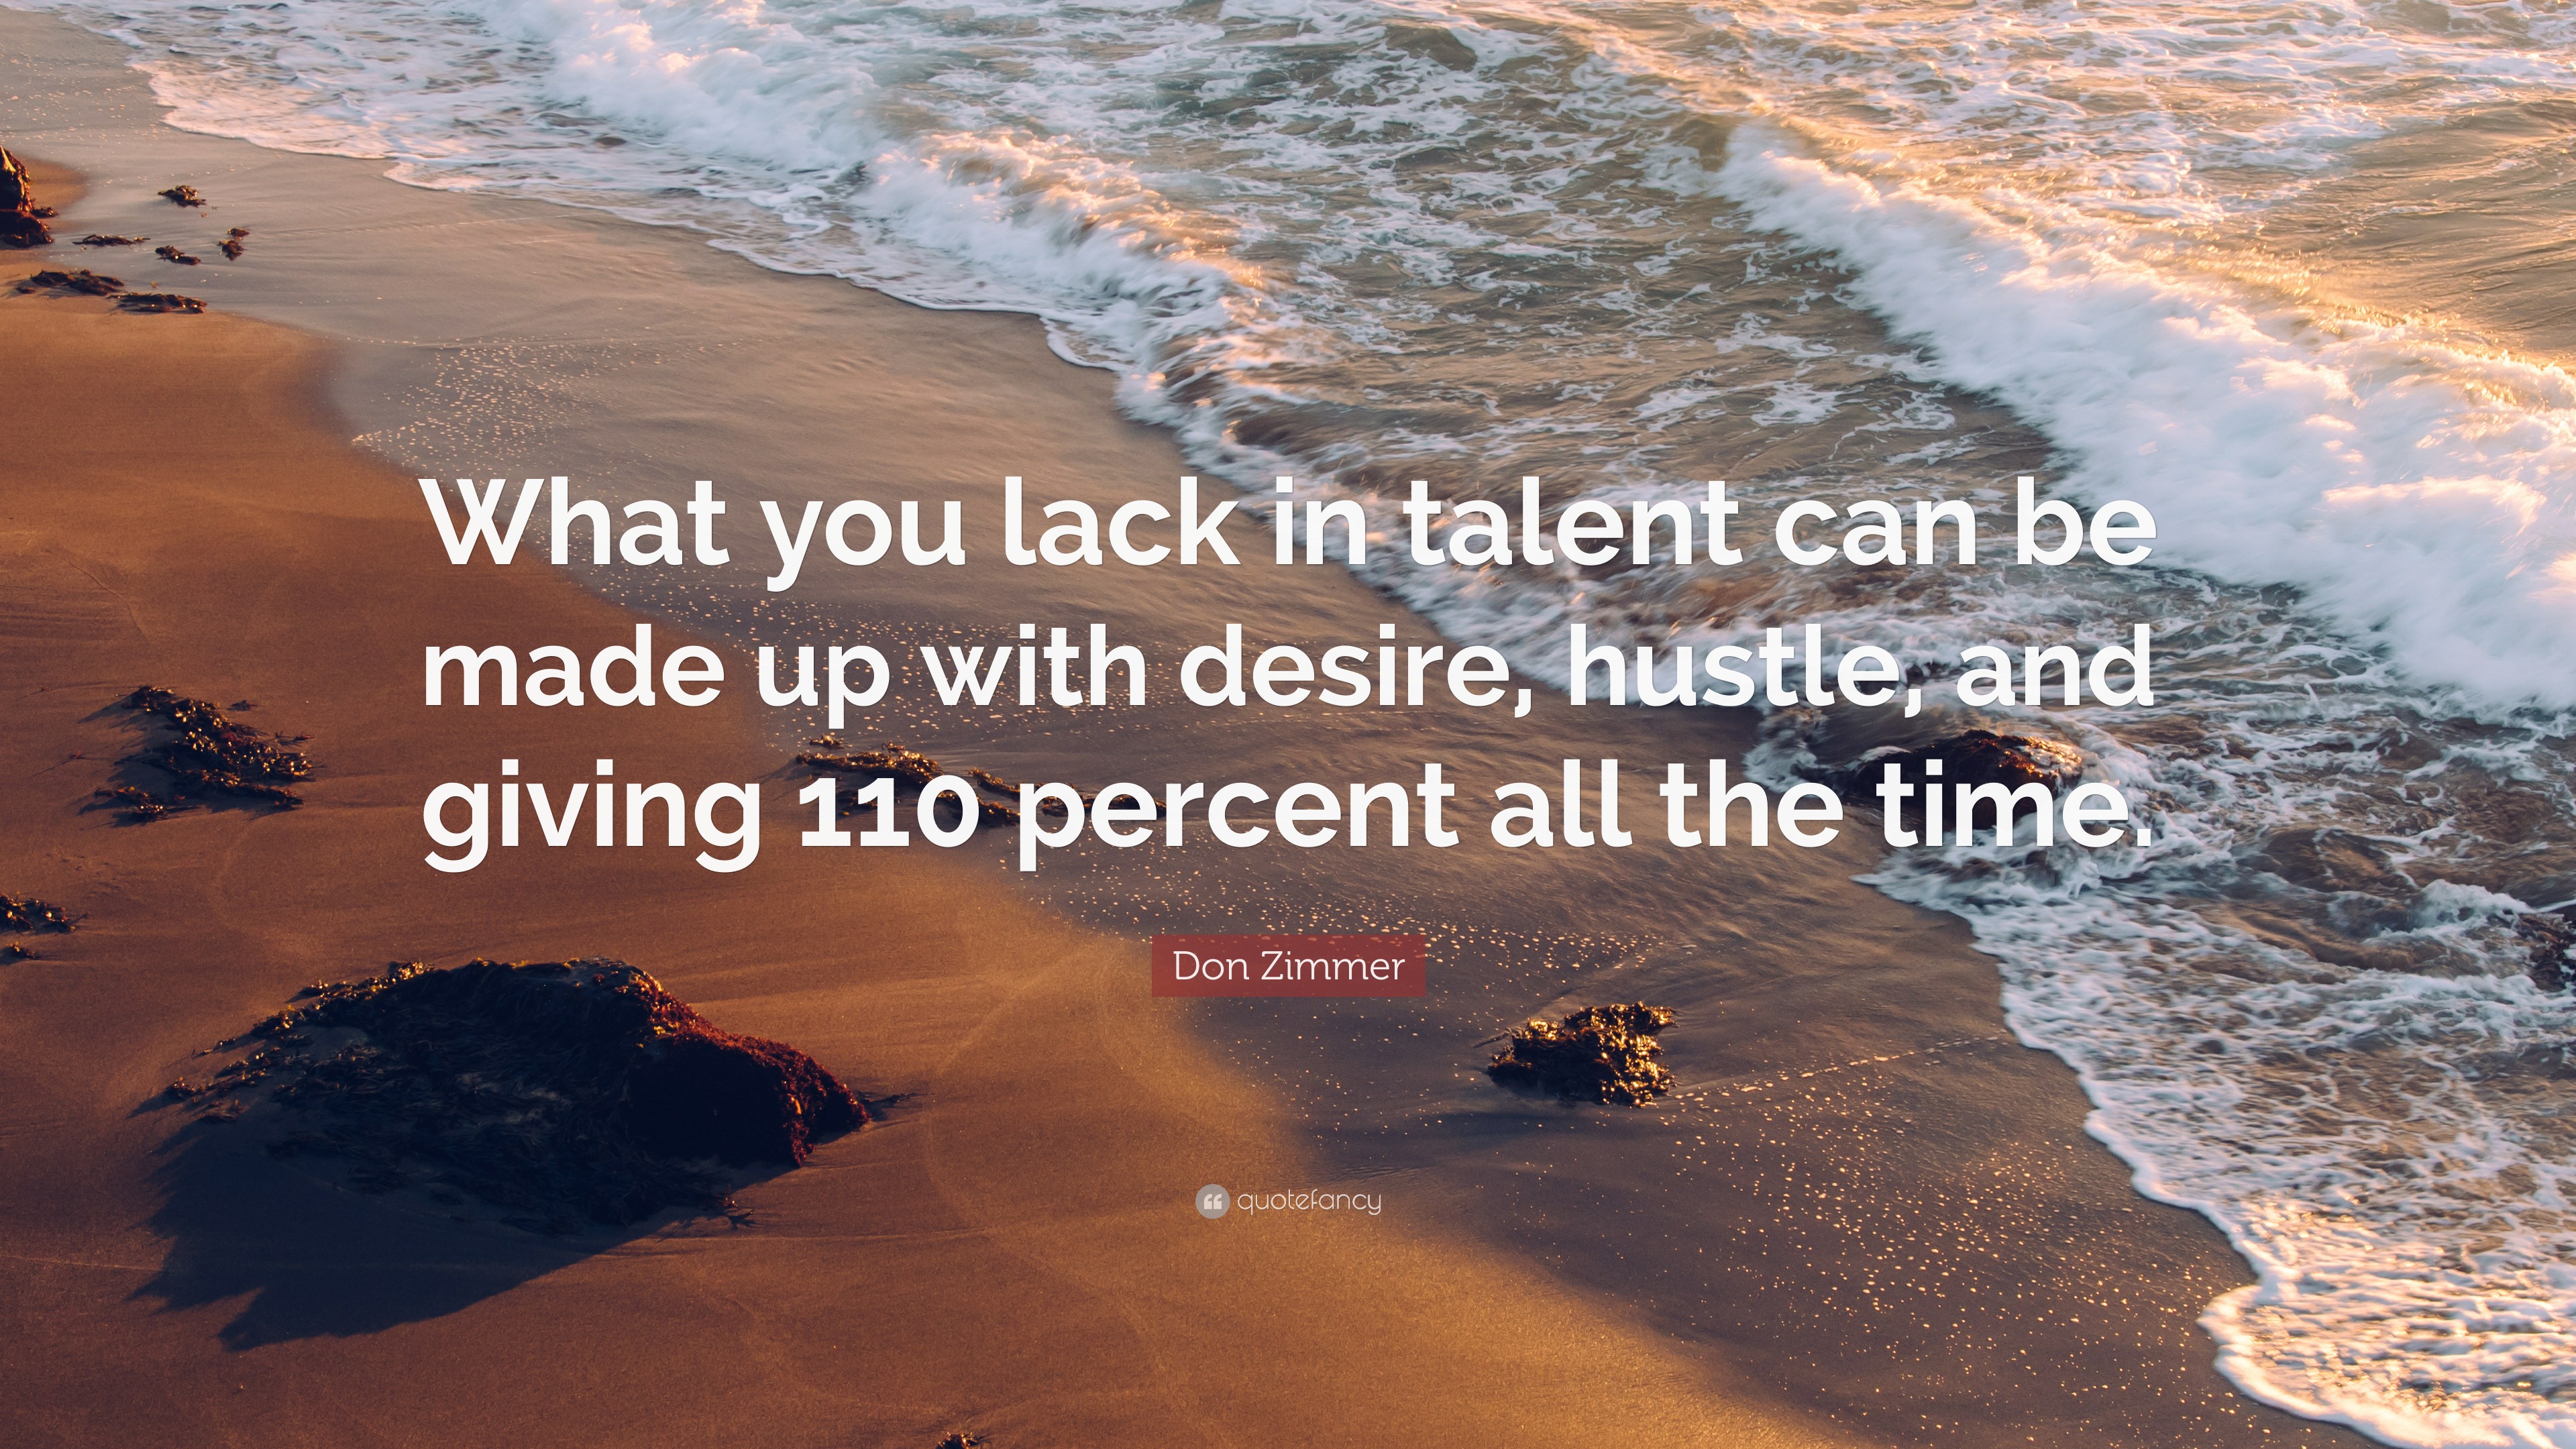 Edulink International Campus - What you lack in talent can be made up with  desire, hustle and giving 110 percent all the time. - Don Zimmer #EDULINK  #successlessons #successquotes #life #success #quotes #donzimmer